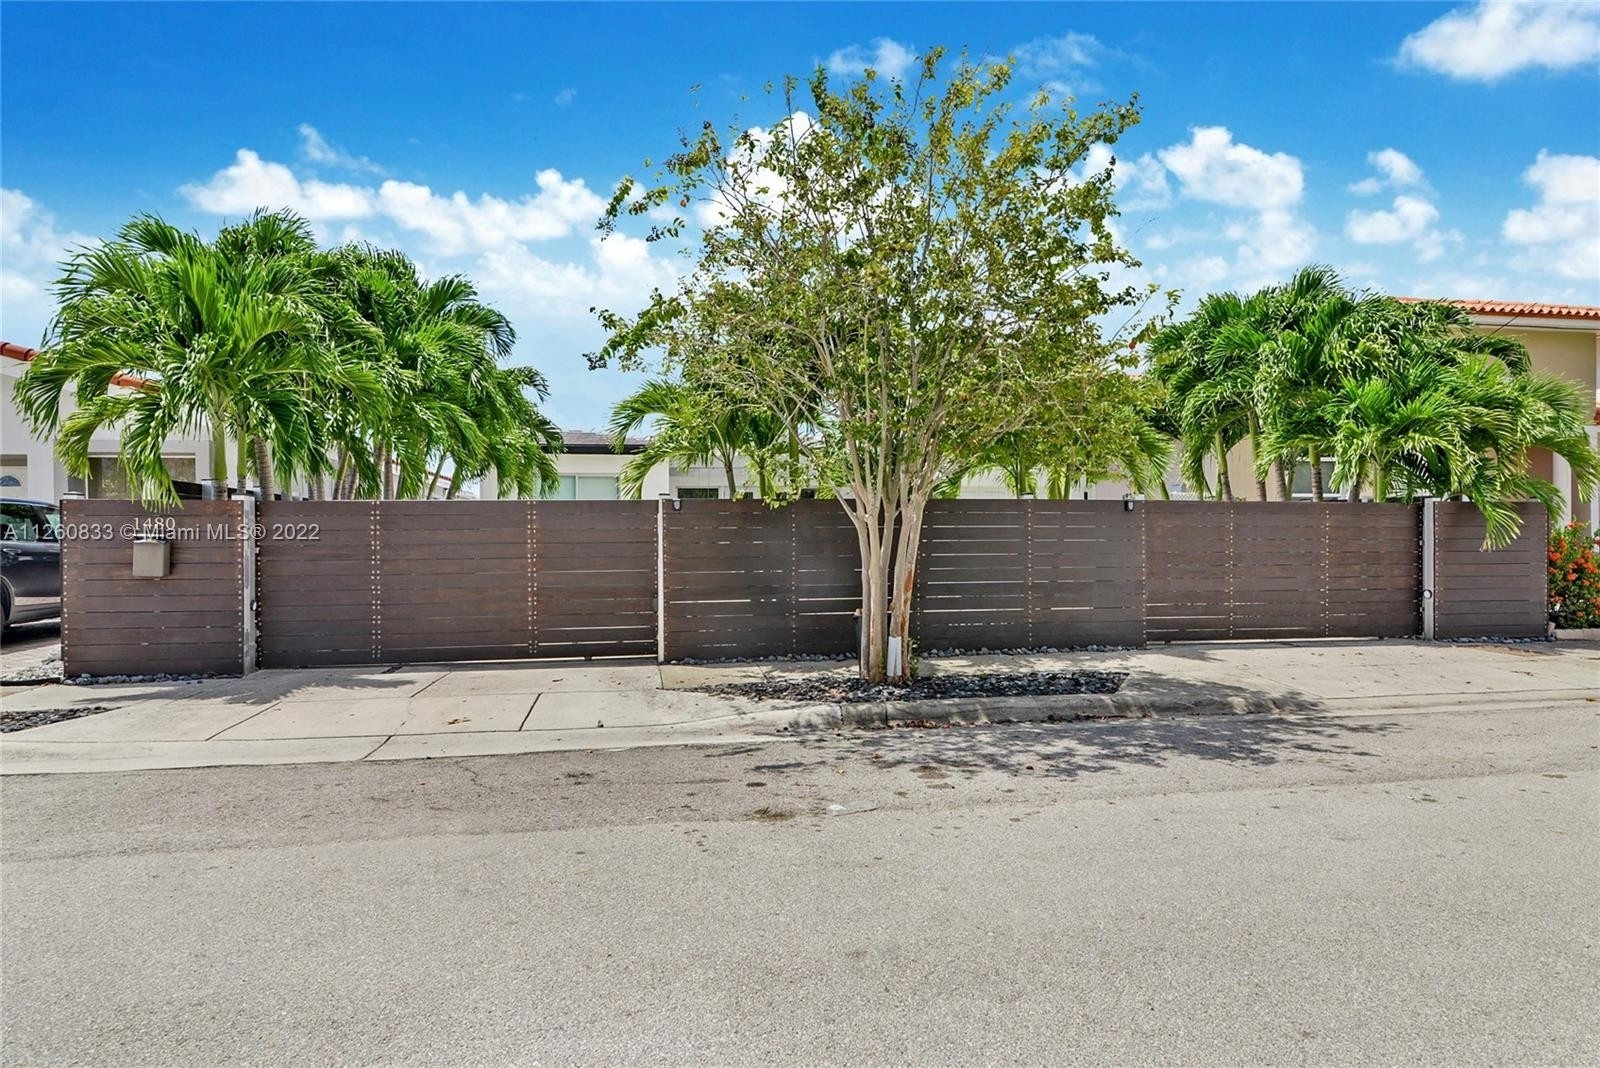 Single Family Home at Biscayne Point, Miami Beach, FL 33141